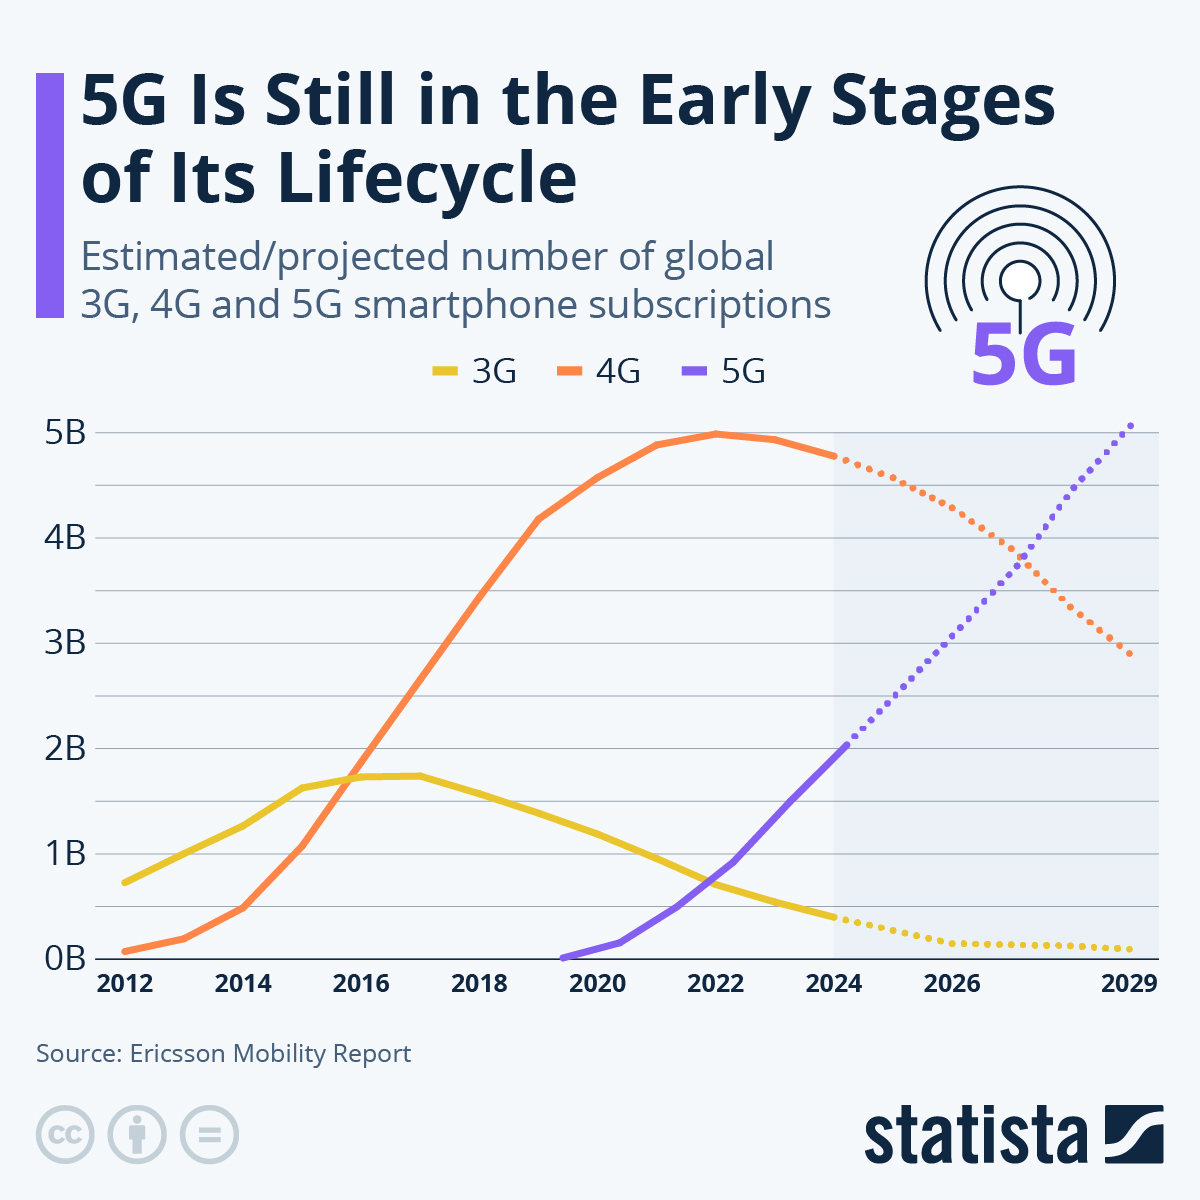 5G is still in the early stage of its lifecycle